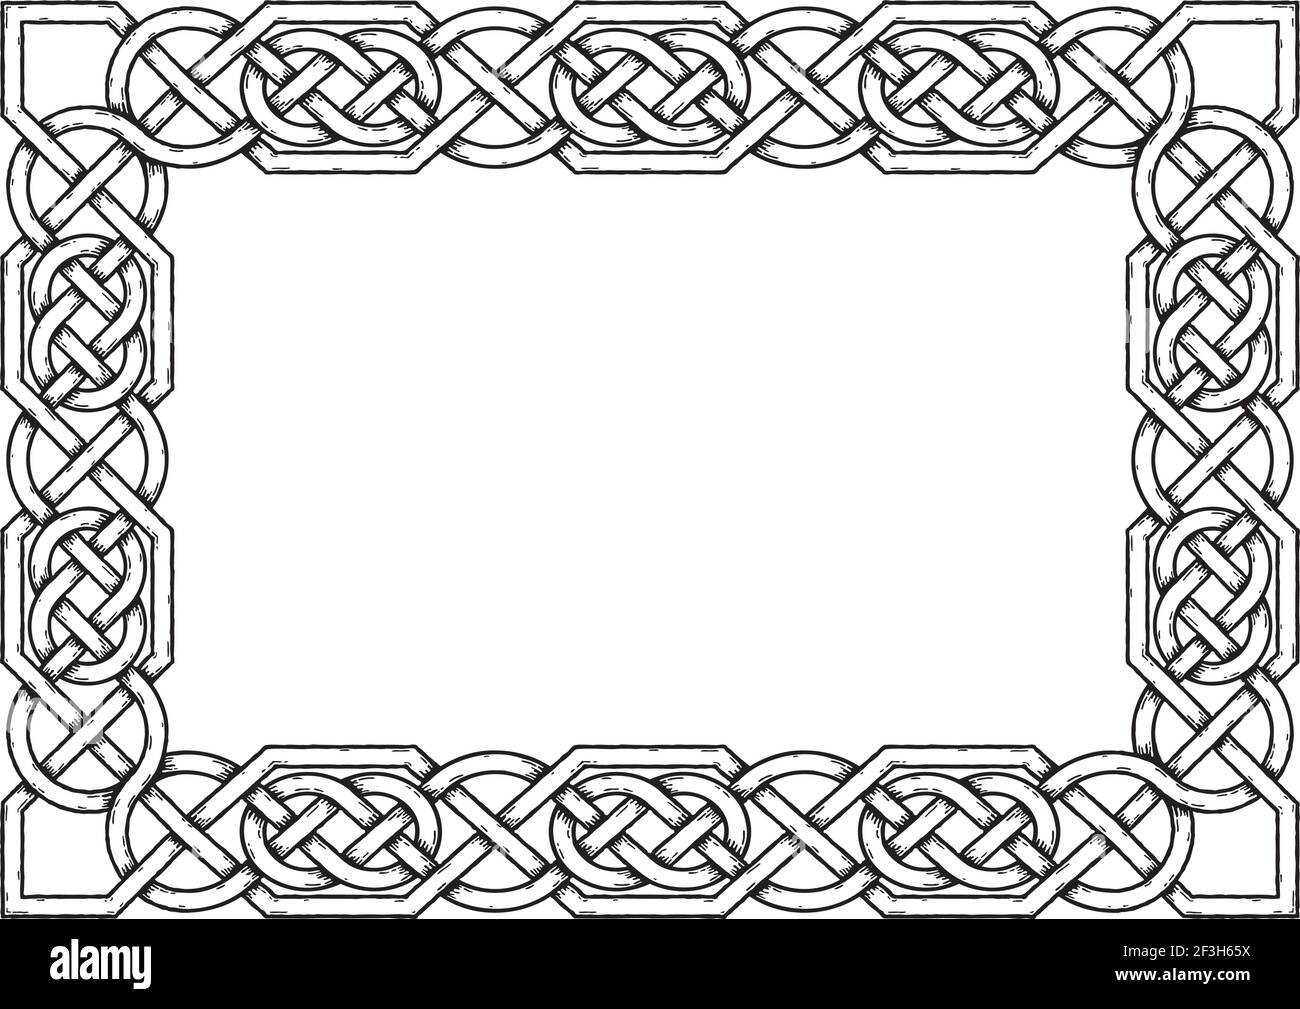 Linear border made with Celtic knots for use in designs for St. Patrick's Day. Stock Vector